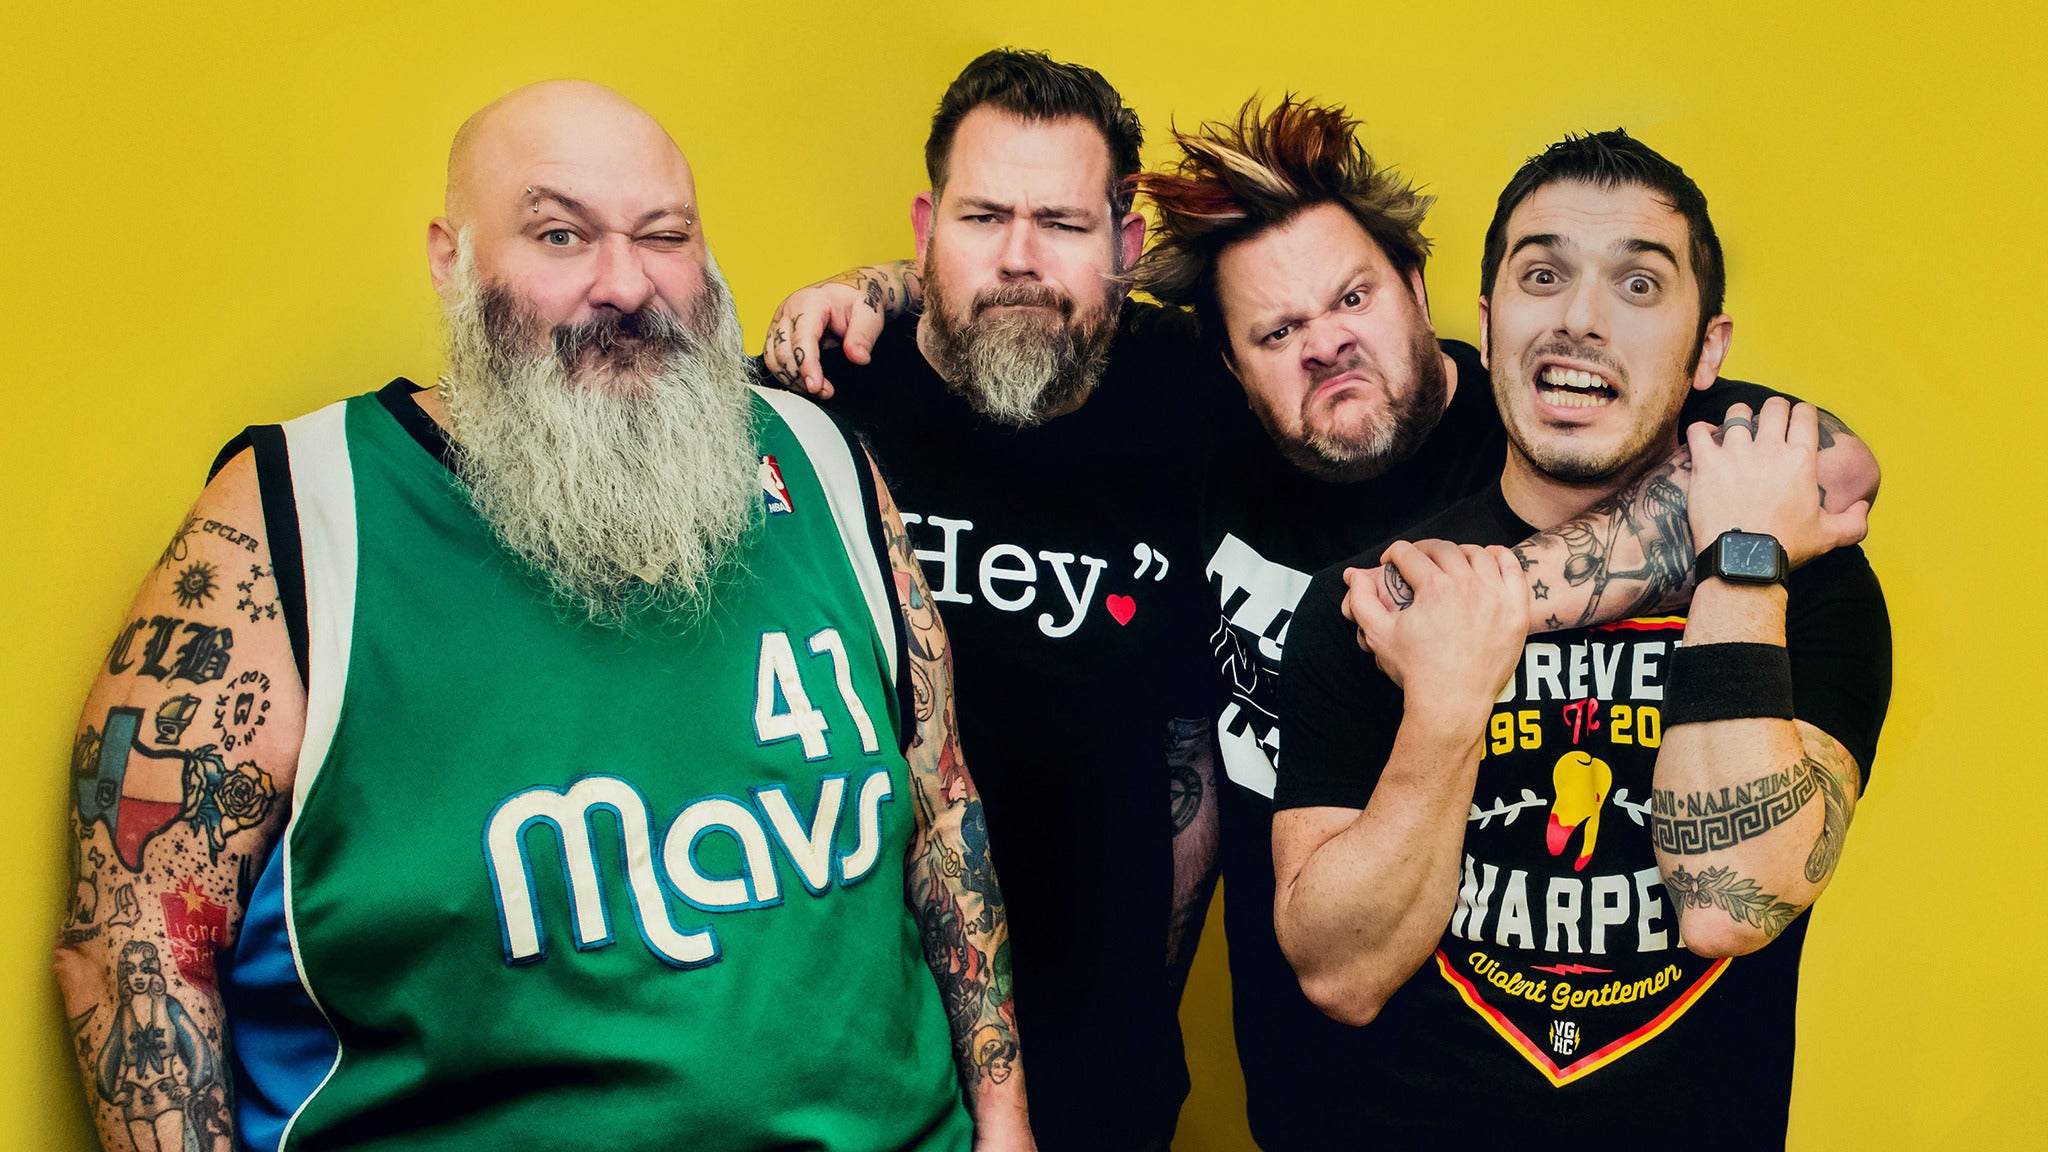 working presale password for Bowling for Soup presale tickets in Ponte Vedra Beach